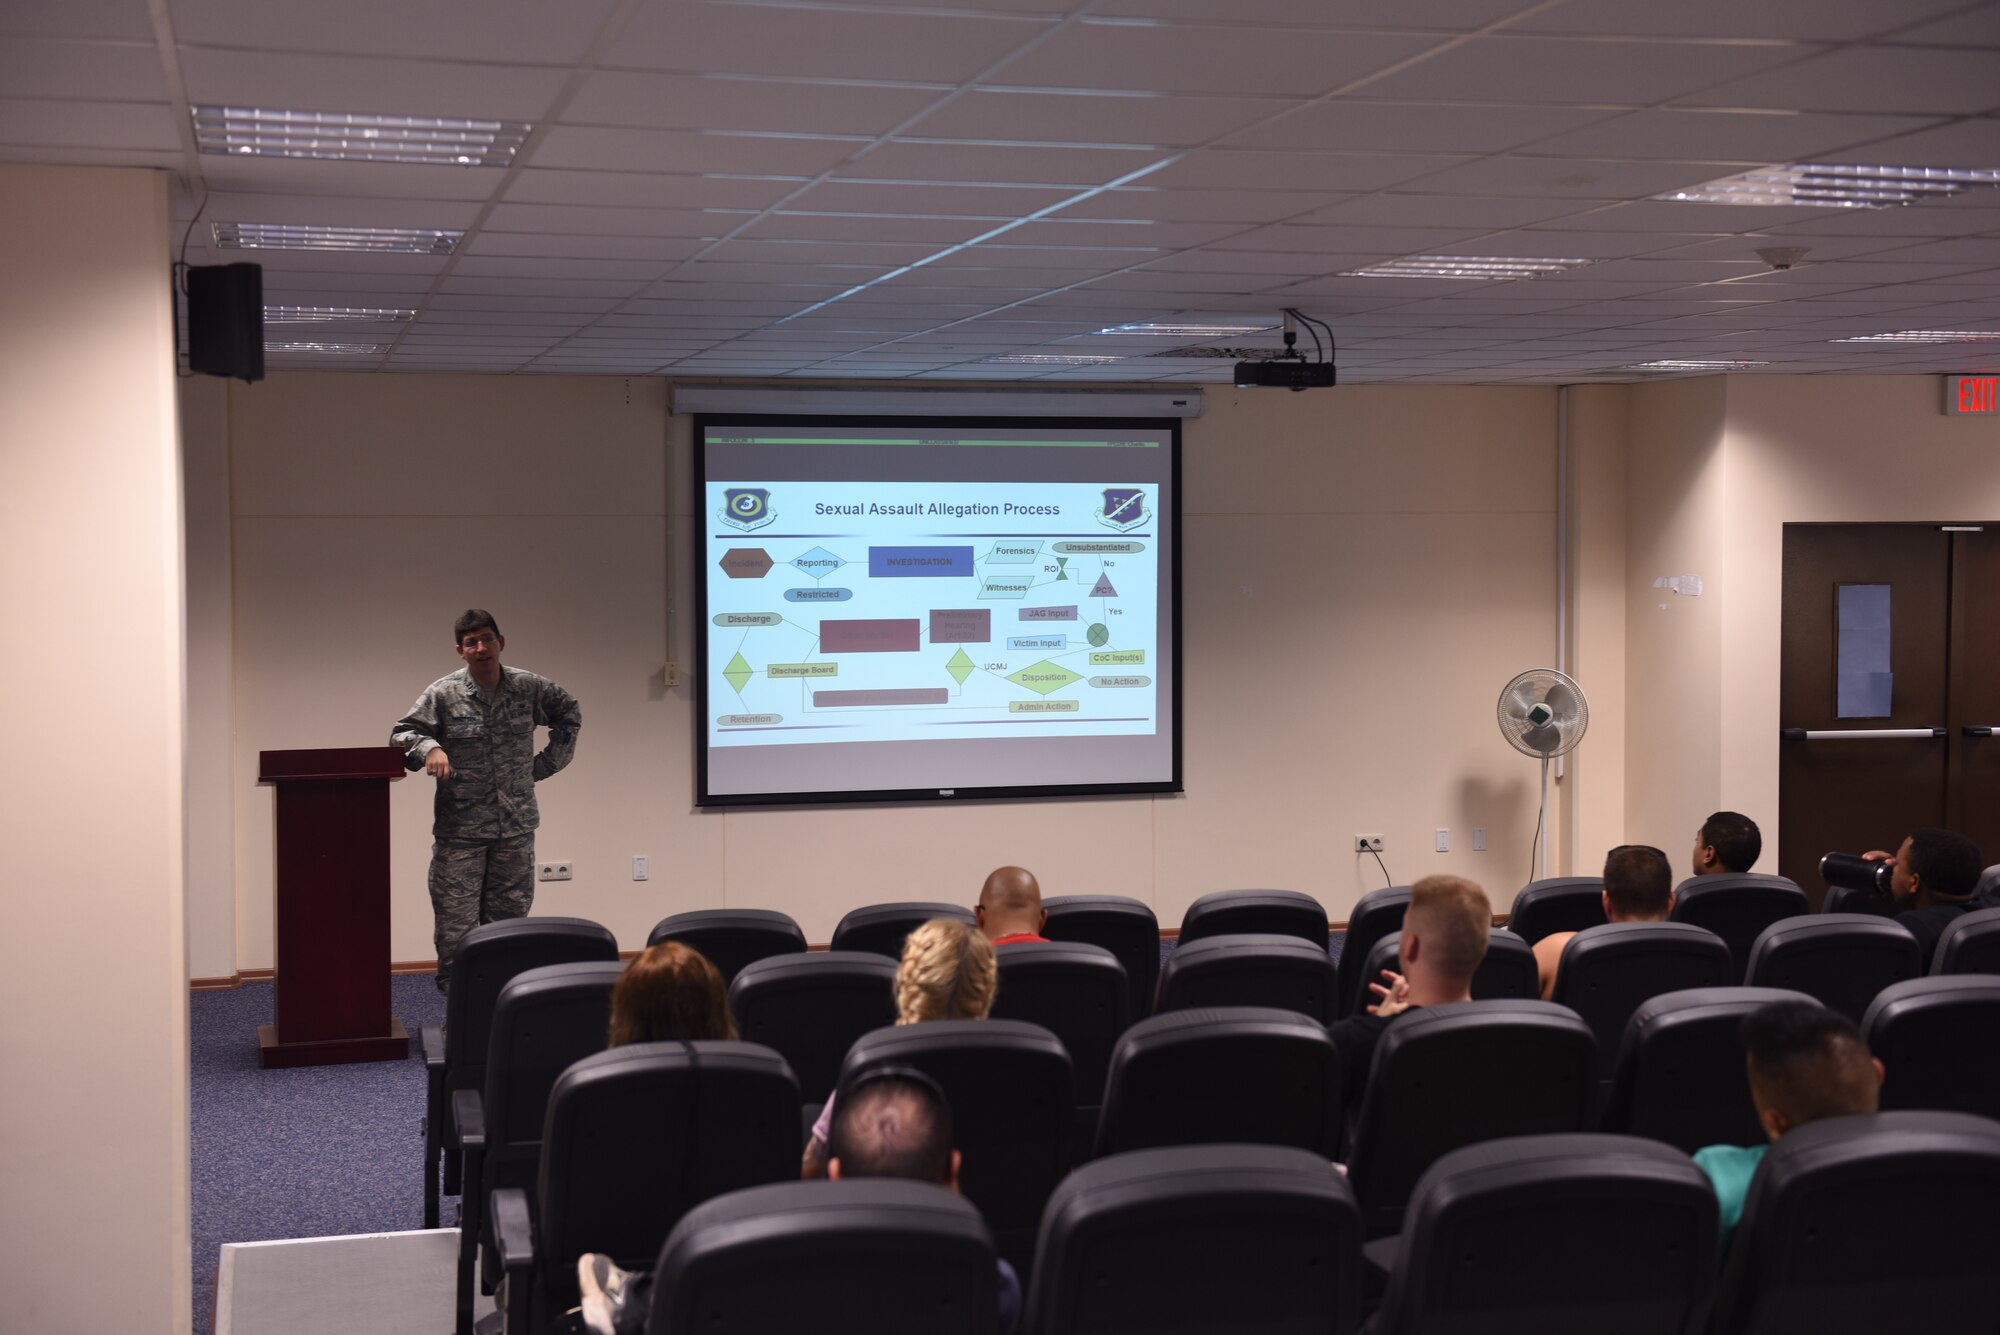 U.S. Air Force Capt. Nathanael Okhuysen briefs 39th Security Forces Squadron members on legal procedures during the SF SAPR Representative course at Incirlik Air Base, Turkey, 2018.